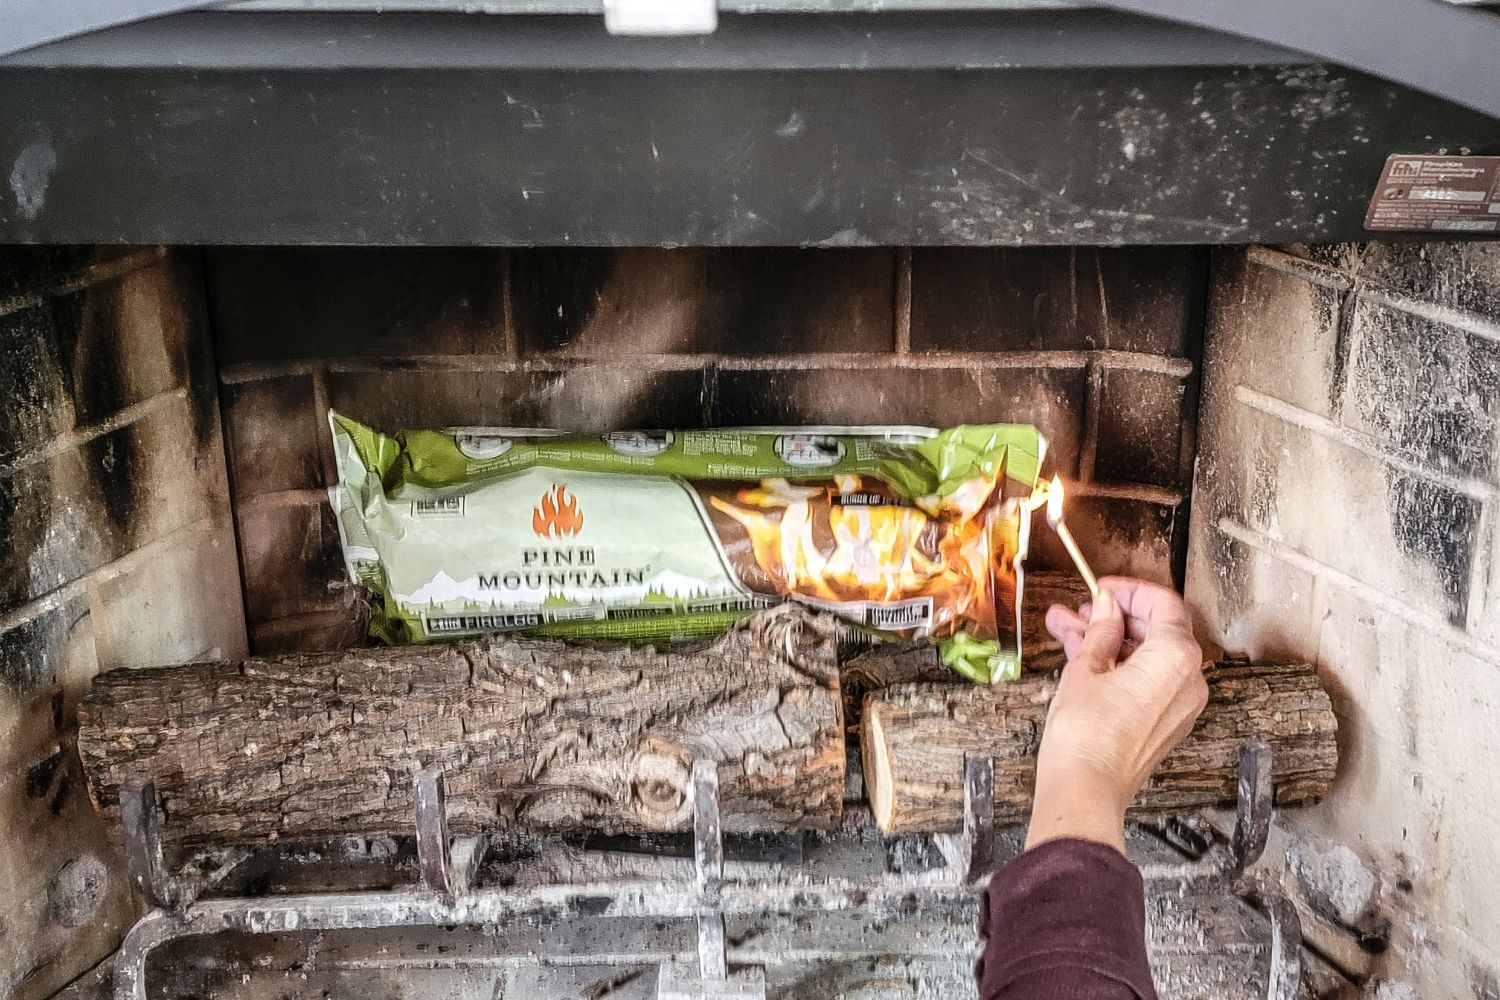 A person bringing a lit match to the end of a Pine Mountain fire log in a fireplace.